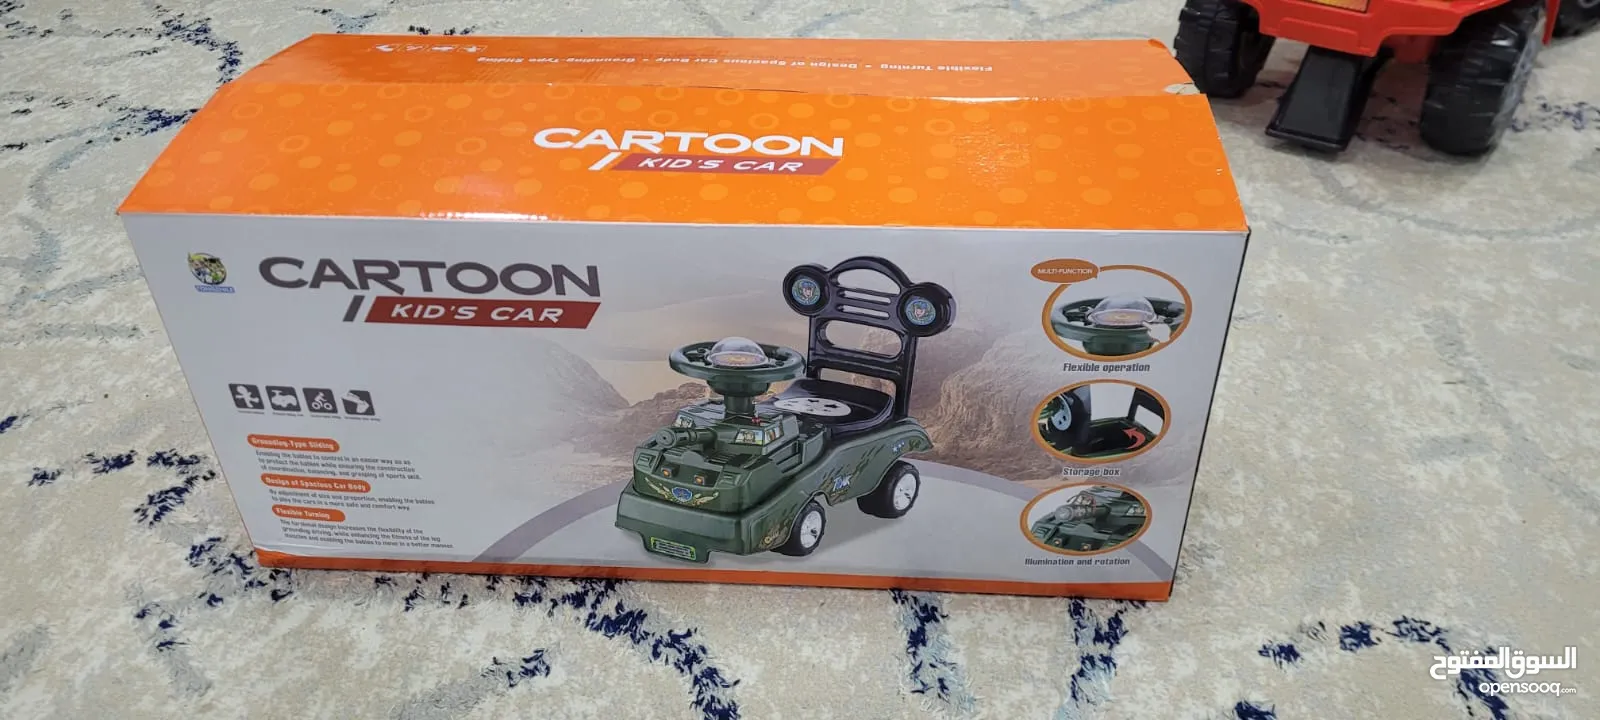 Brand New Kids Toy Car For Sale Military Edition